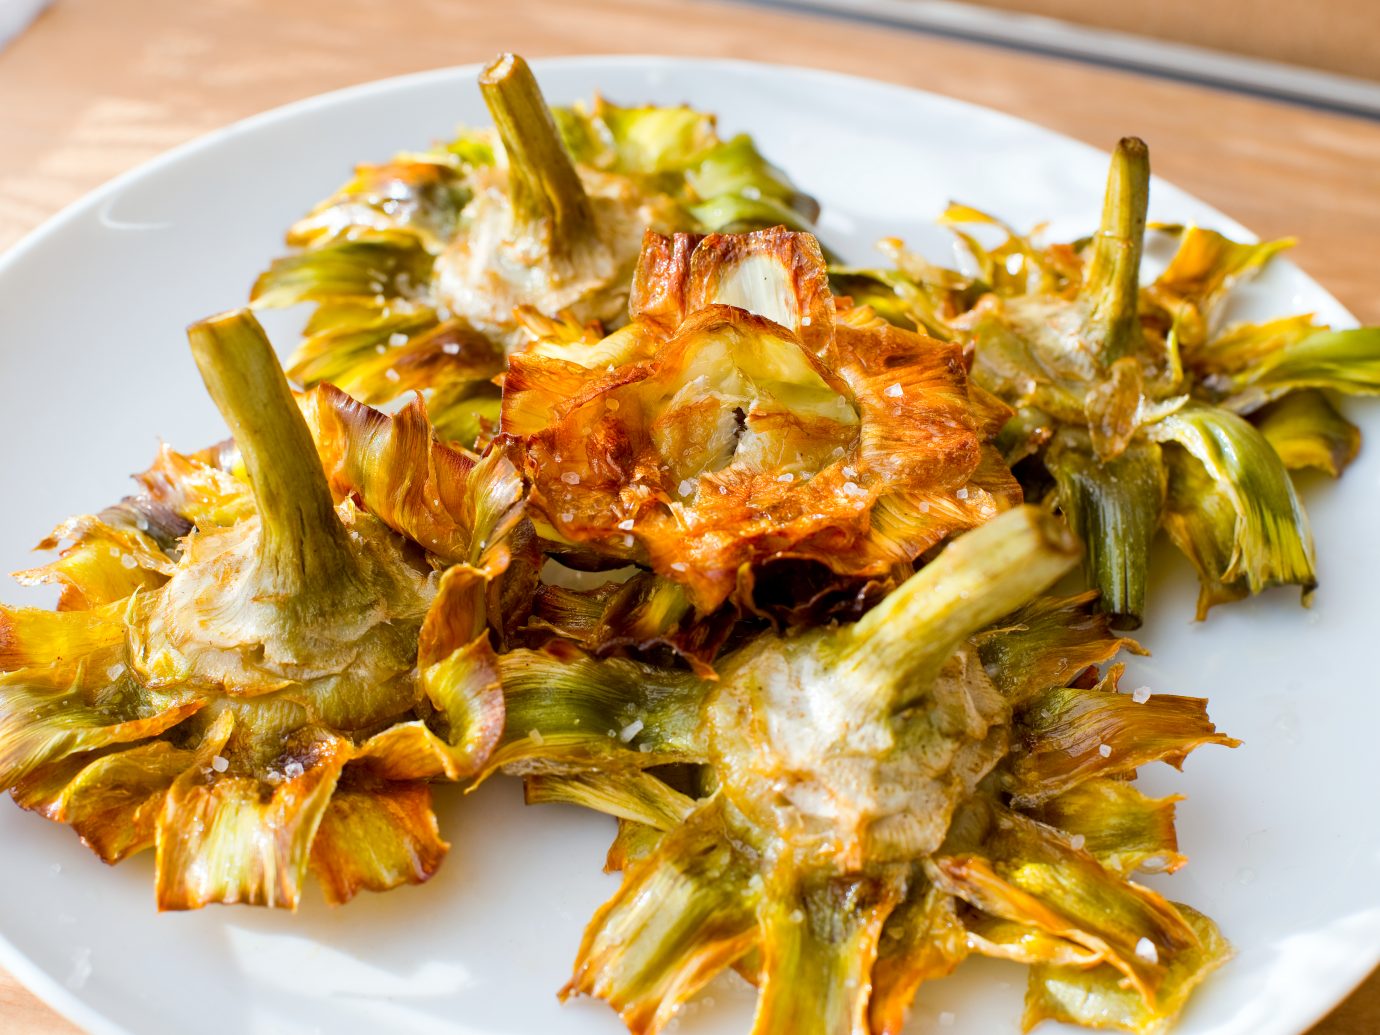 Roman fried artichokes (jewish style) with flakes of sea salt on a wooden table.